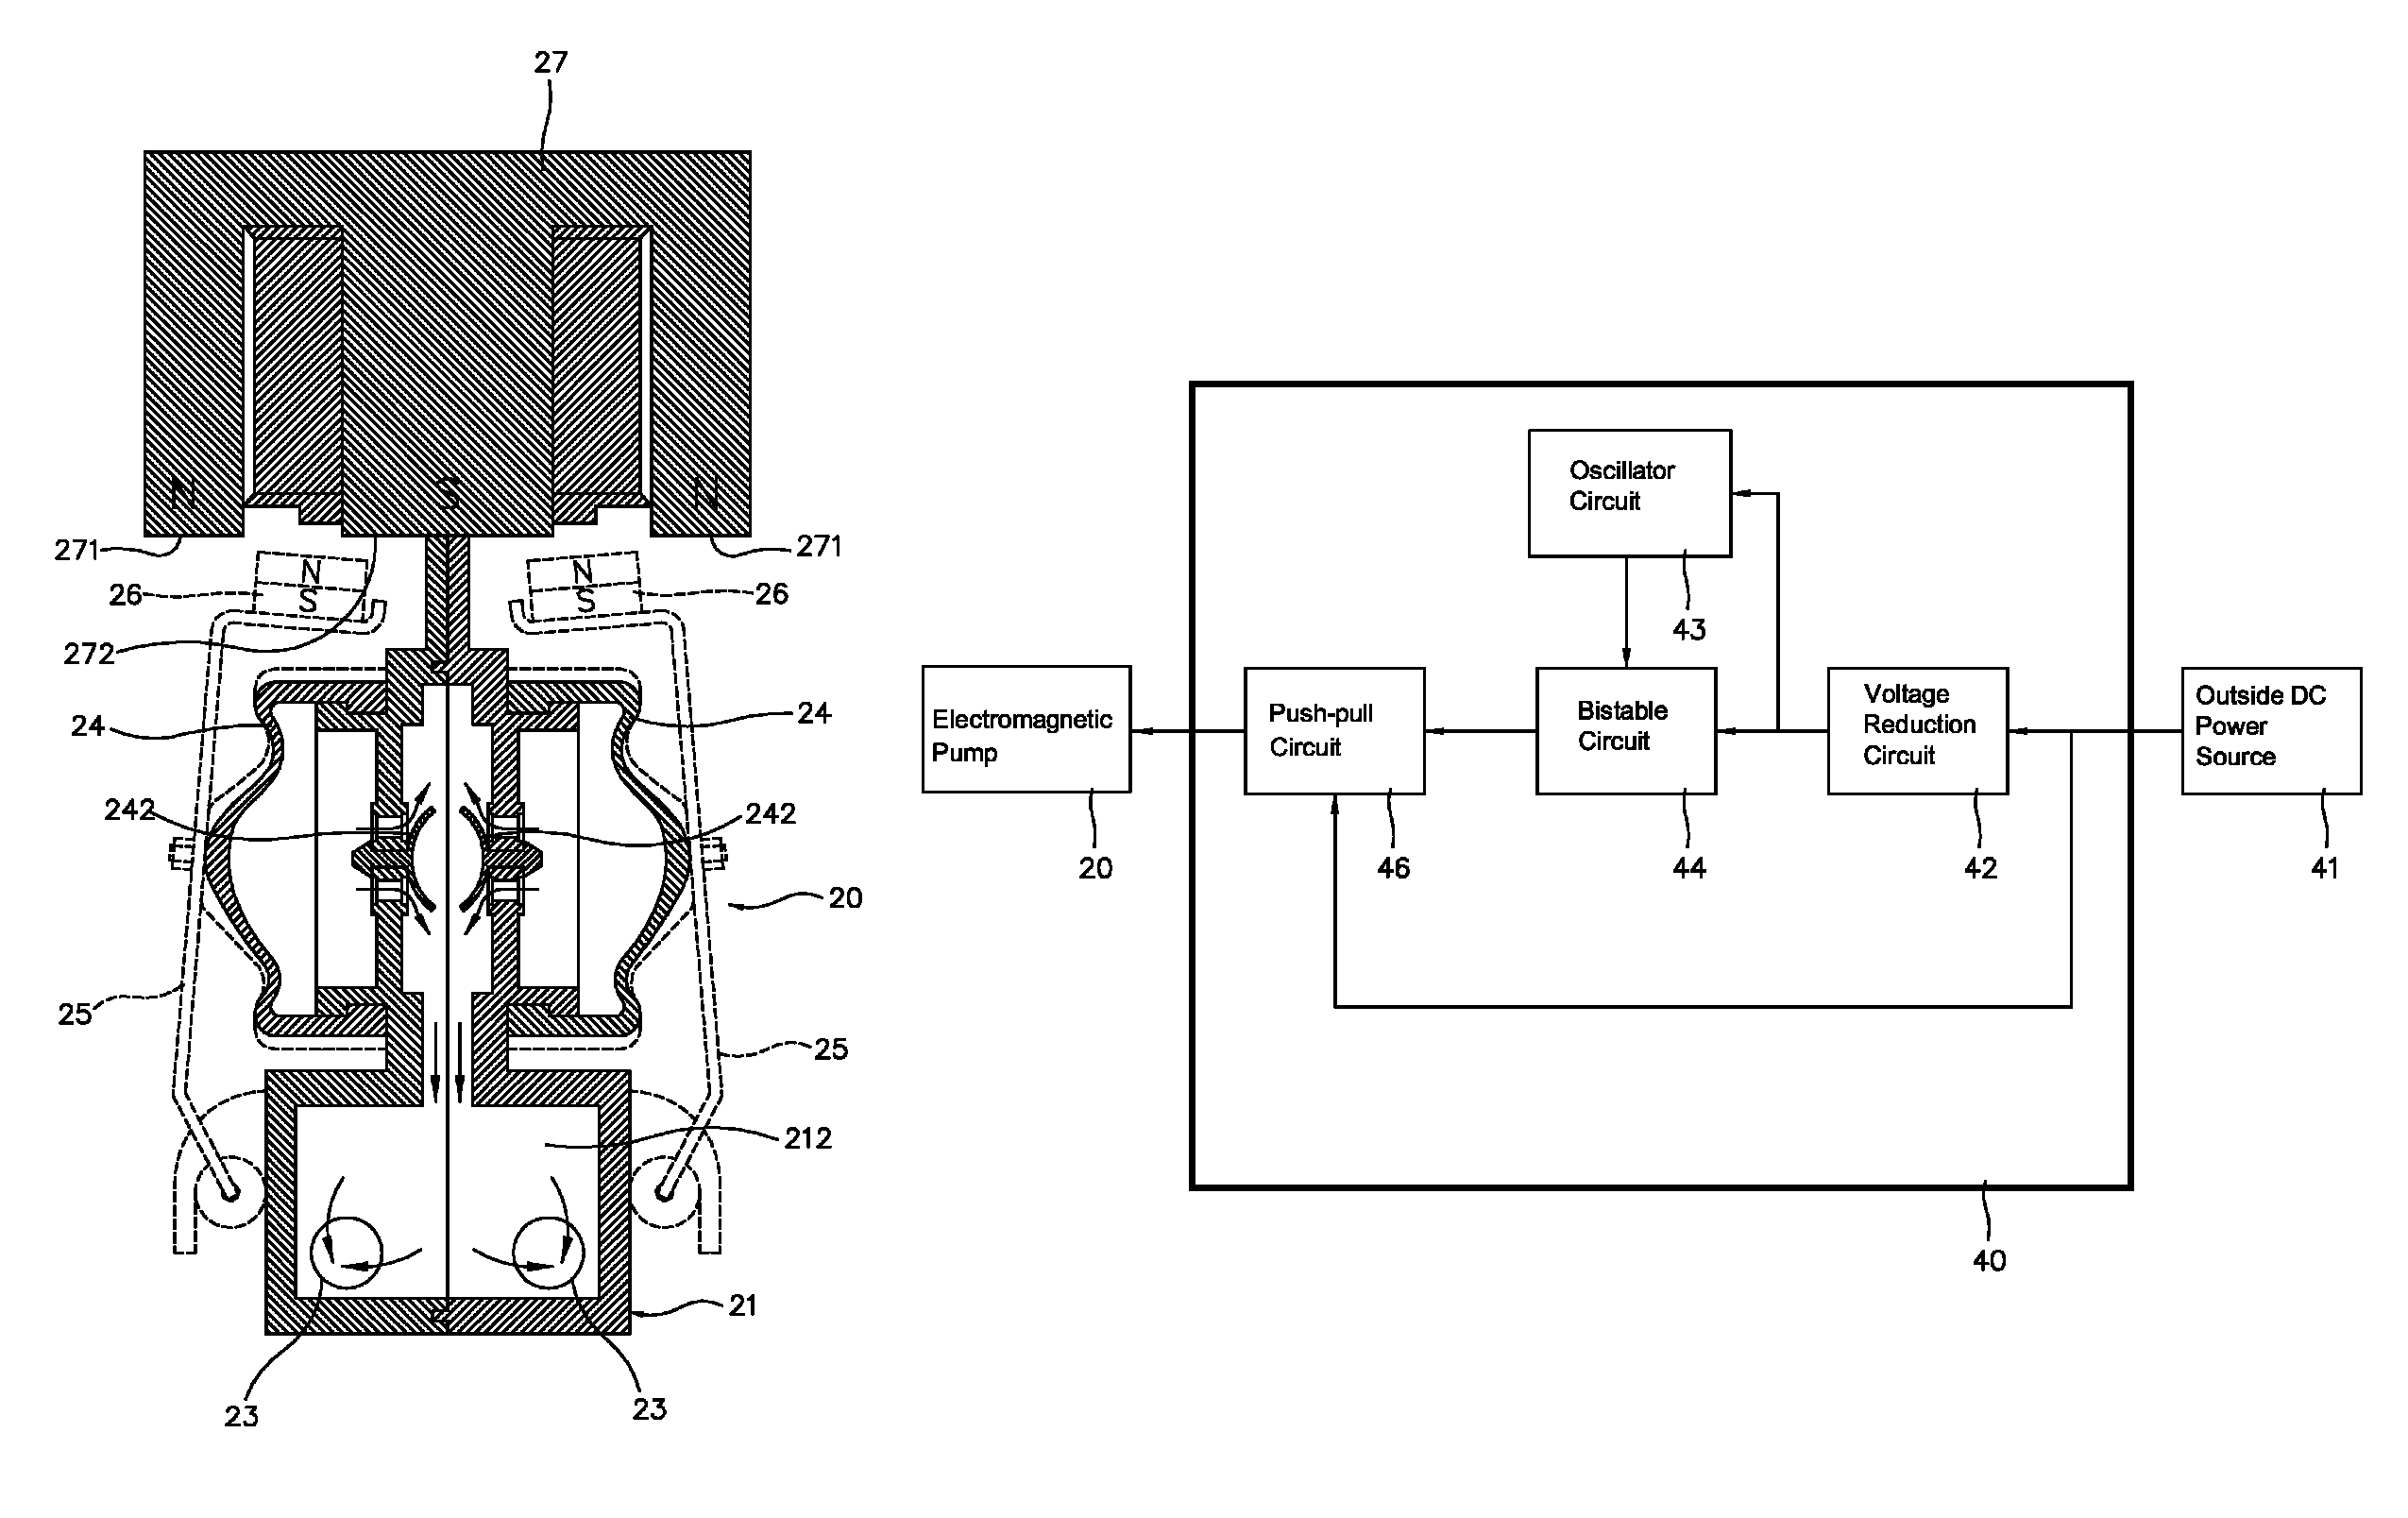 Electromagnetic pump with frequency converter circuit